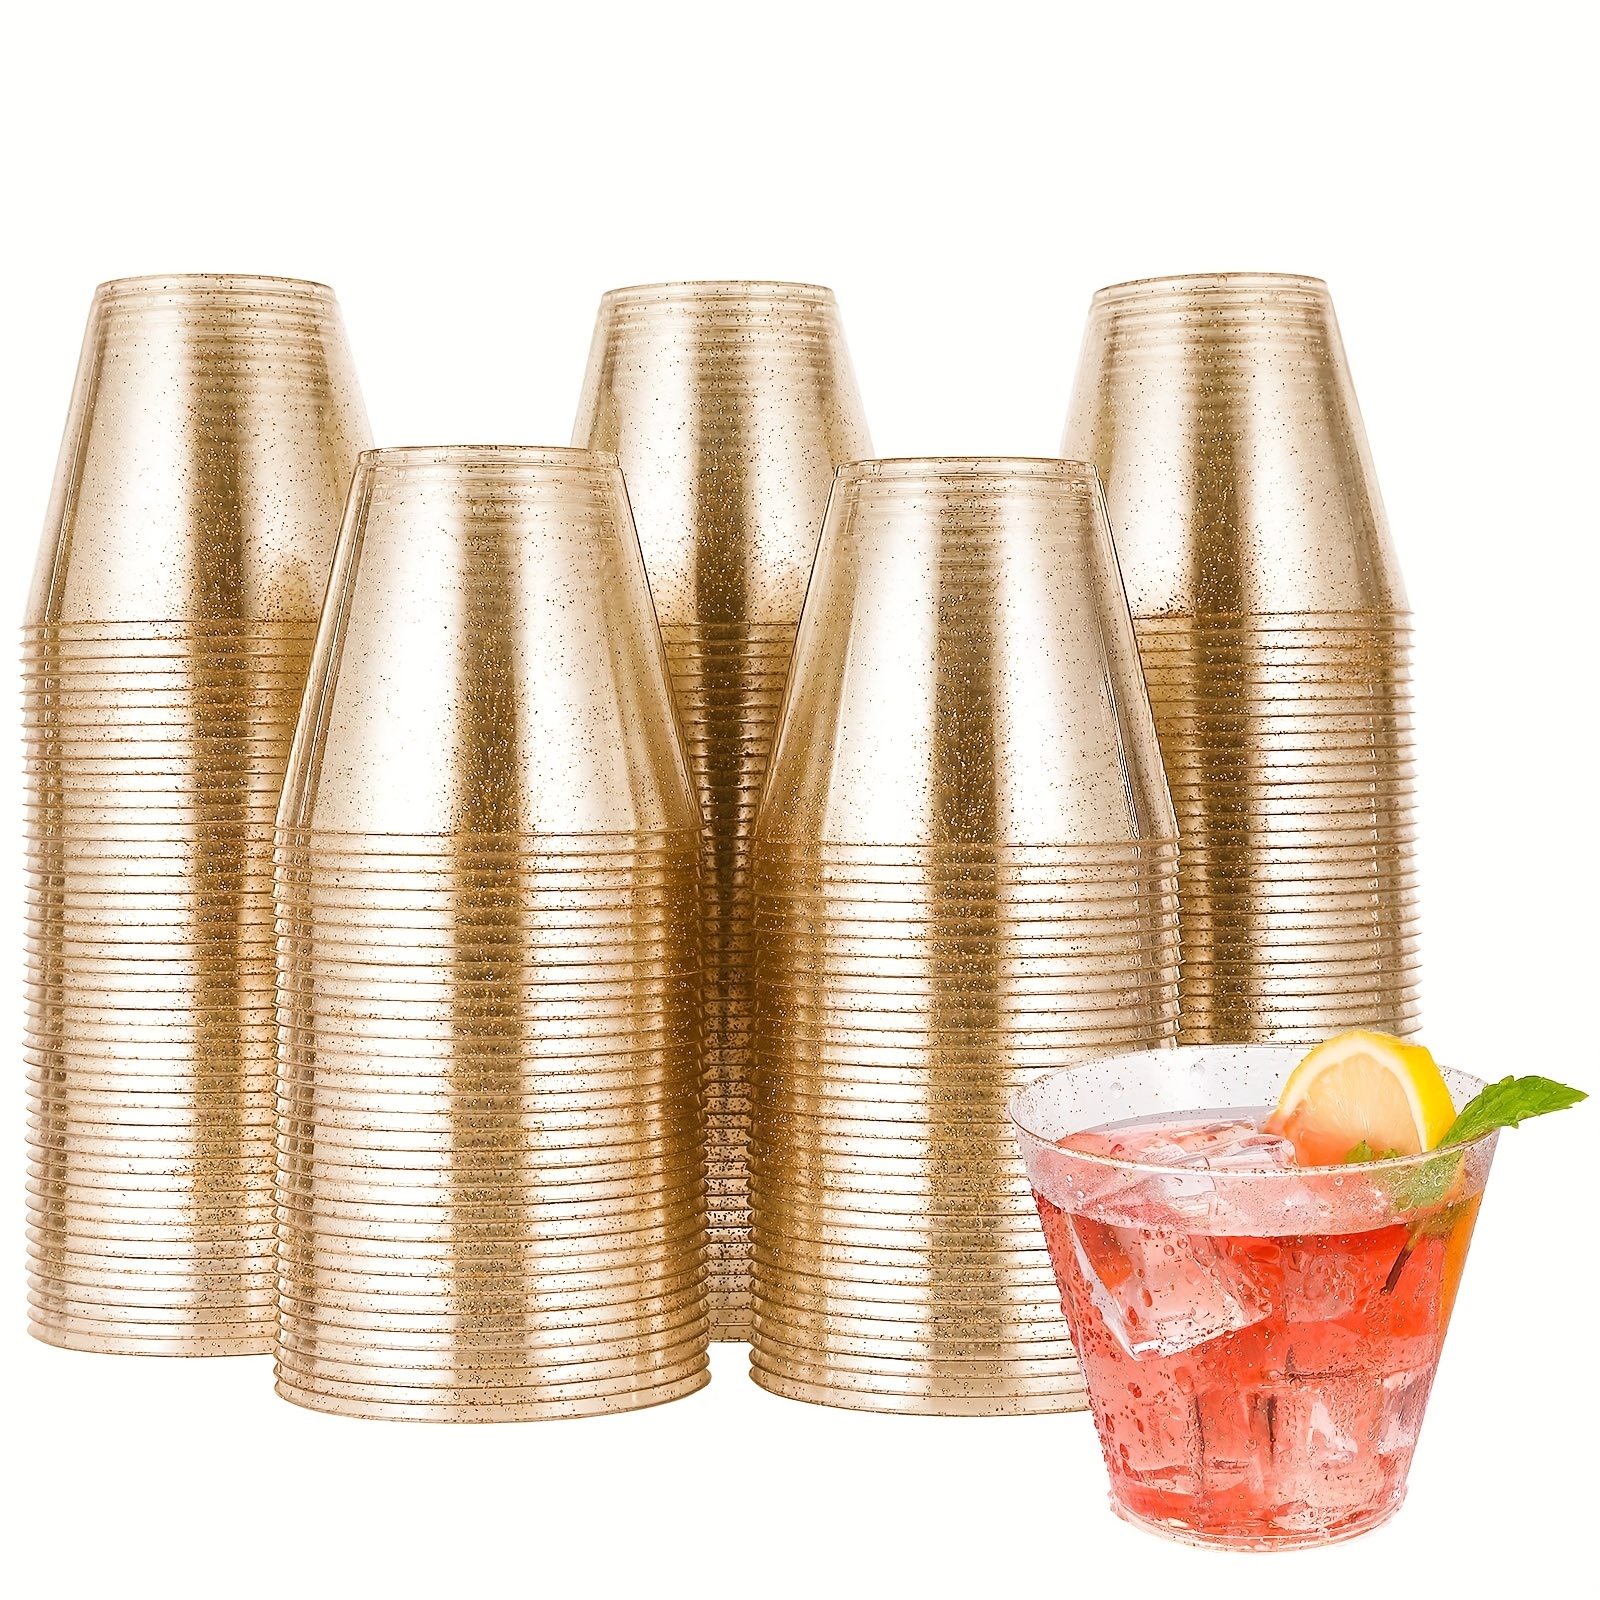 TINKER 50pcs Clear Plastic Cups, Tumblers Cups, Fancy Disposable Wedding  Receptions Parties Cups, Elegant Party Cups with Gold/Silver Rim, 12 Oz 